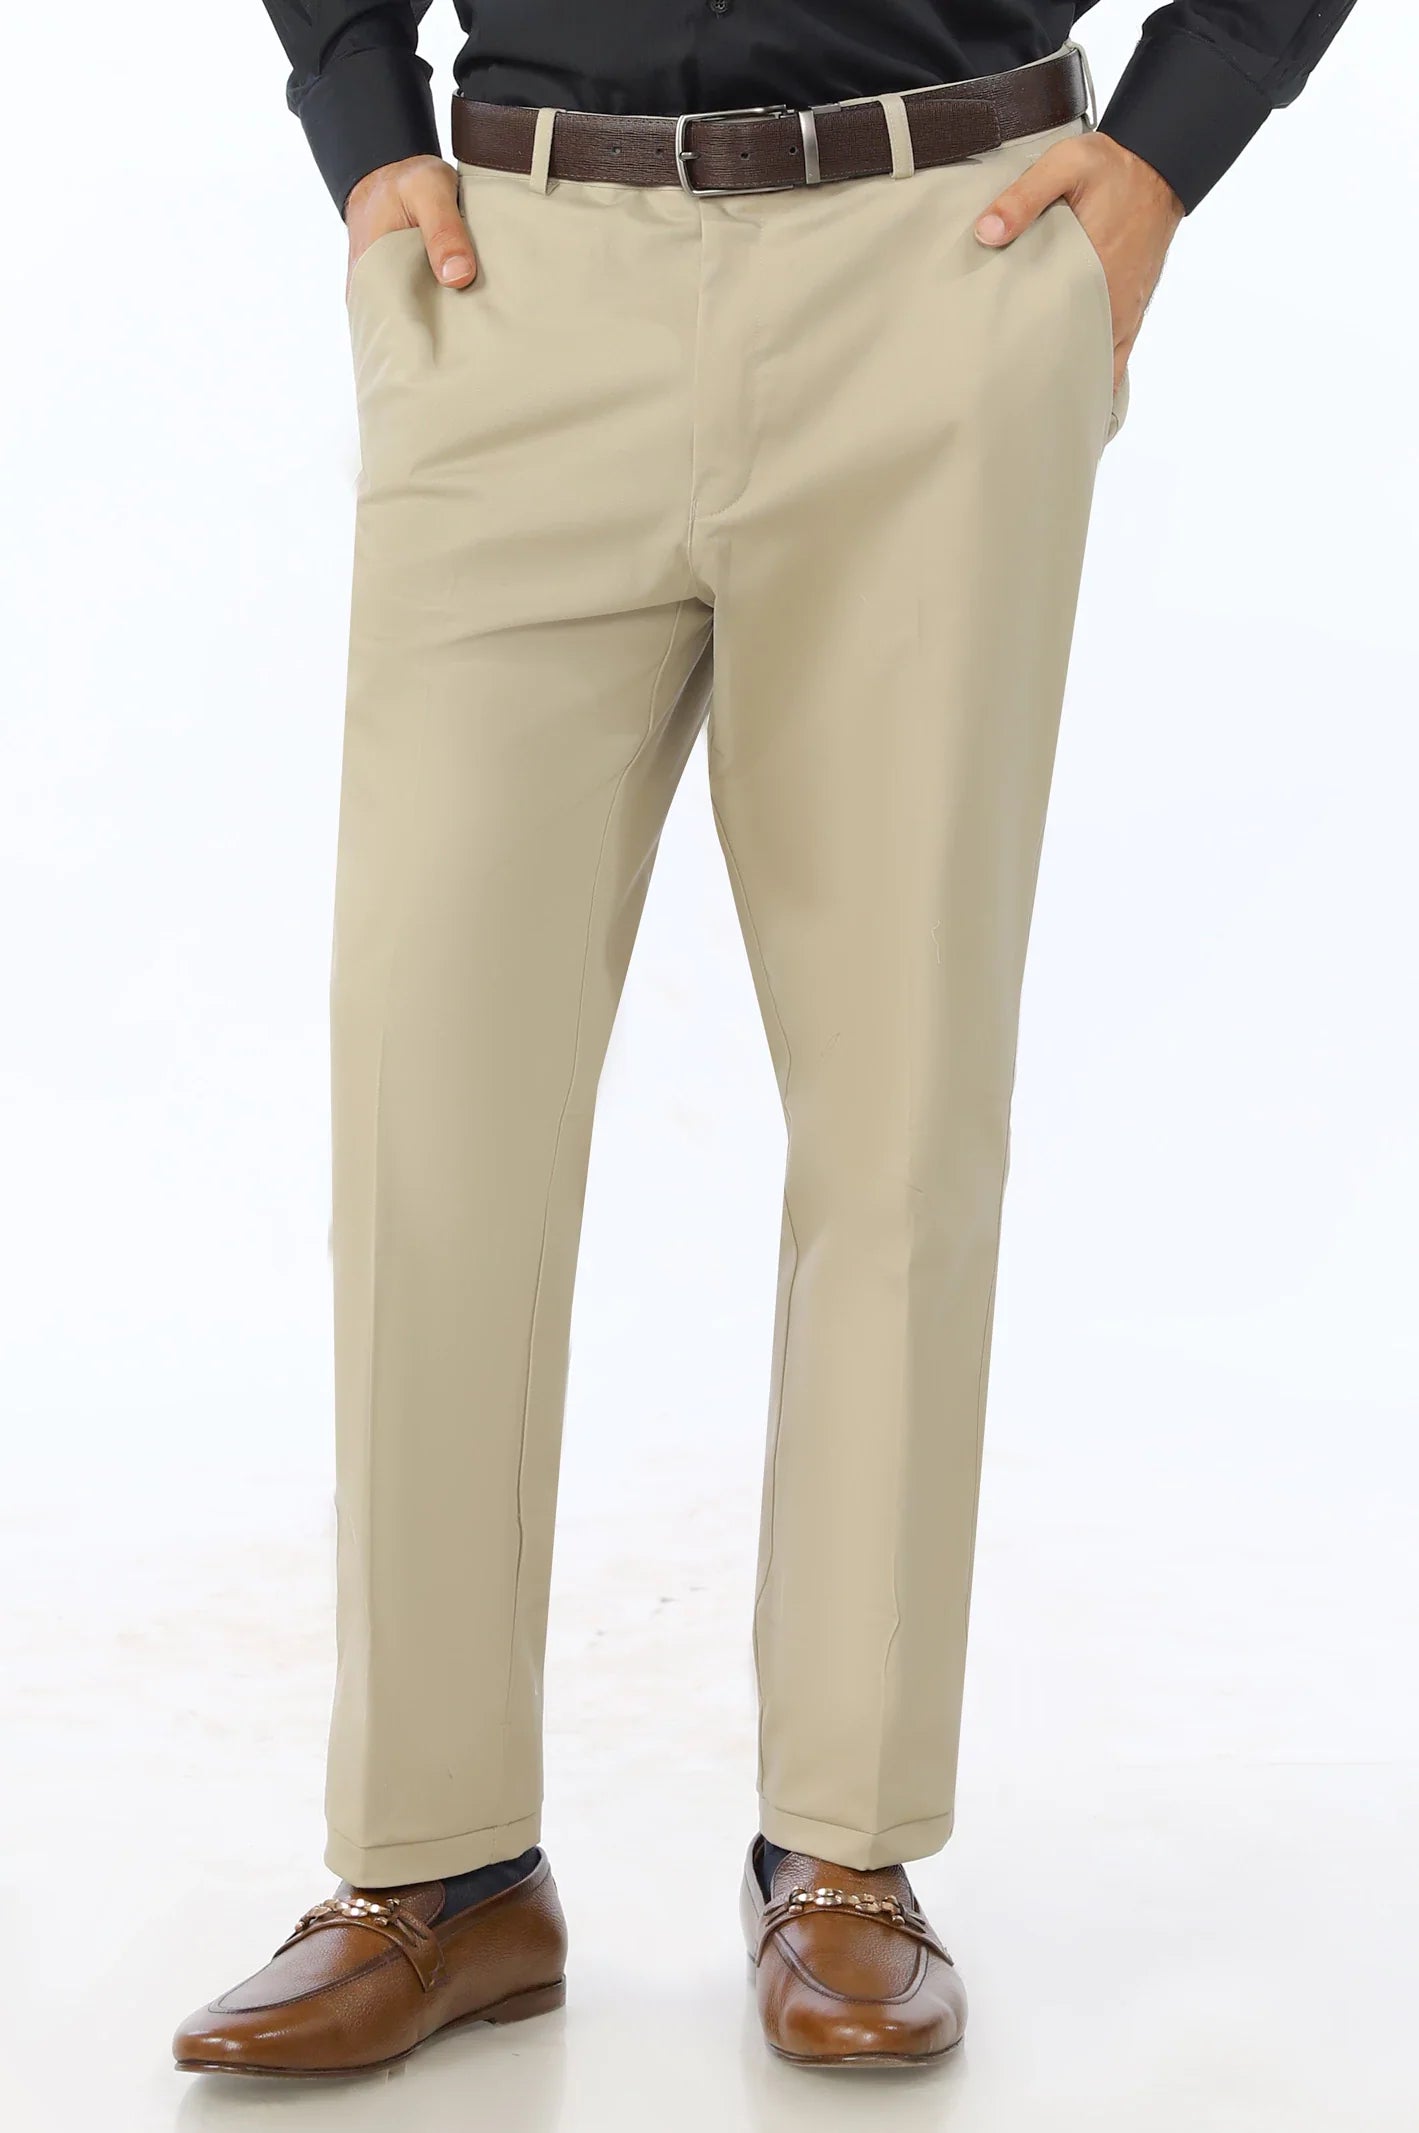 Khaki Formal Cotton Trouser From Diners